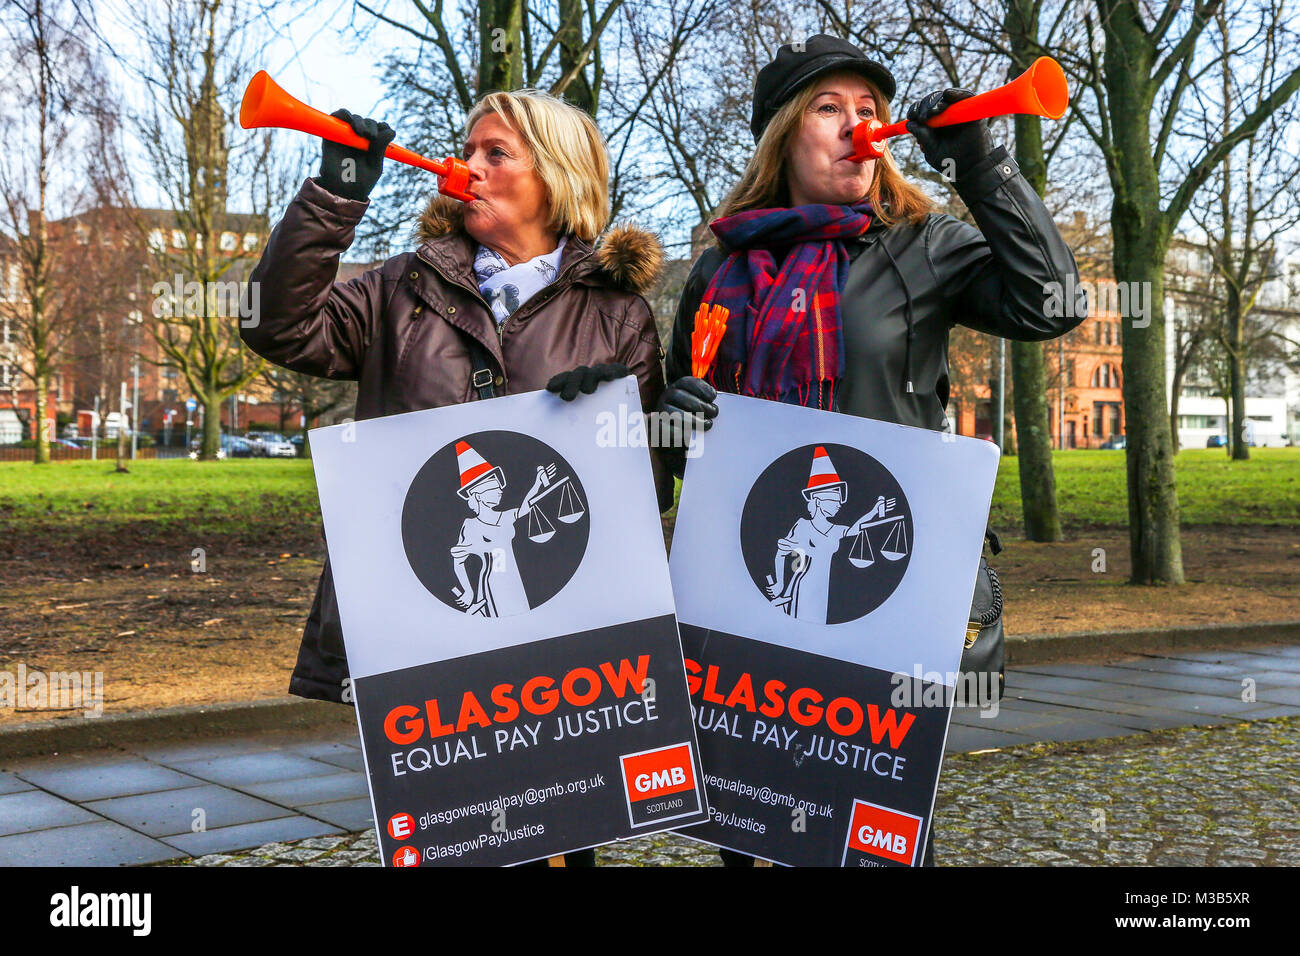 Glasgow, Scotland. 10th February, 2018. Hundreds of women, supported by the Trades Union UNISON, took part in a protest march from Glasgow Green to George Square in an effort to put pressure on Glasgow City Council and get them to honour their pledge to settle a long running dispute over equal pay. Although Glasgow City Council lost their legal case and agreed to hold negotiations with UNISON and other Trades Unions some months ago many claimants accuse the City Council of procrastination after several months of apparent inaction. Credit: Findlay/Alamy Live News Stock Photo